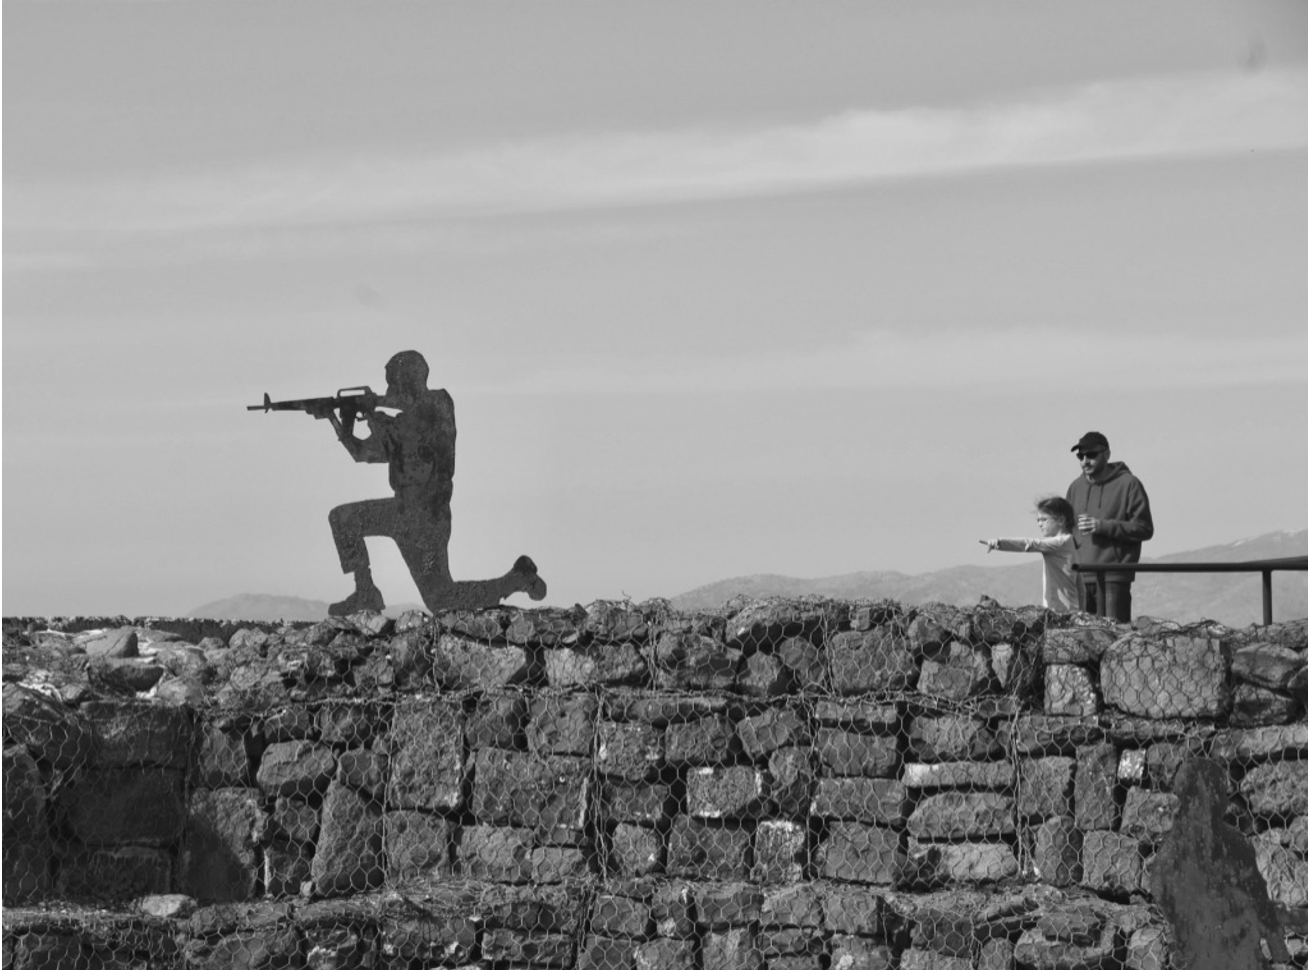 A black and white photograph. There is a wall made of stone with fencing in front of it. On top of the wall is a metal cutout of a man in silhouette holding a rifle and posed for stability with one knee bent at a 90 degree angle in front of him and one knee on the ground. A man and child stand at the wall. The child points toward the silhouetted figure. Half the photograph is of the still sky.